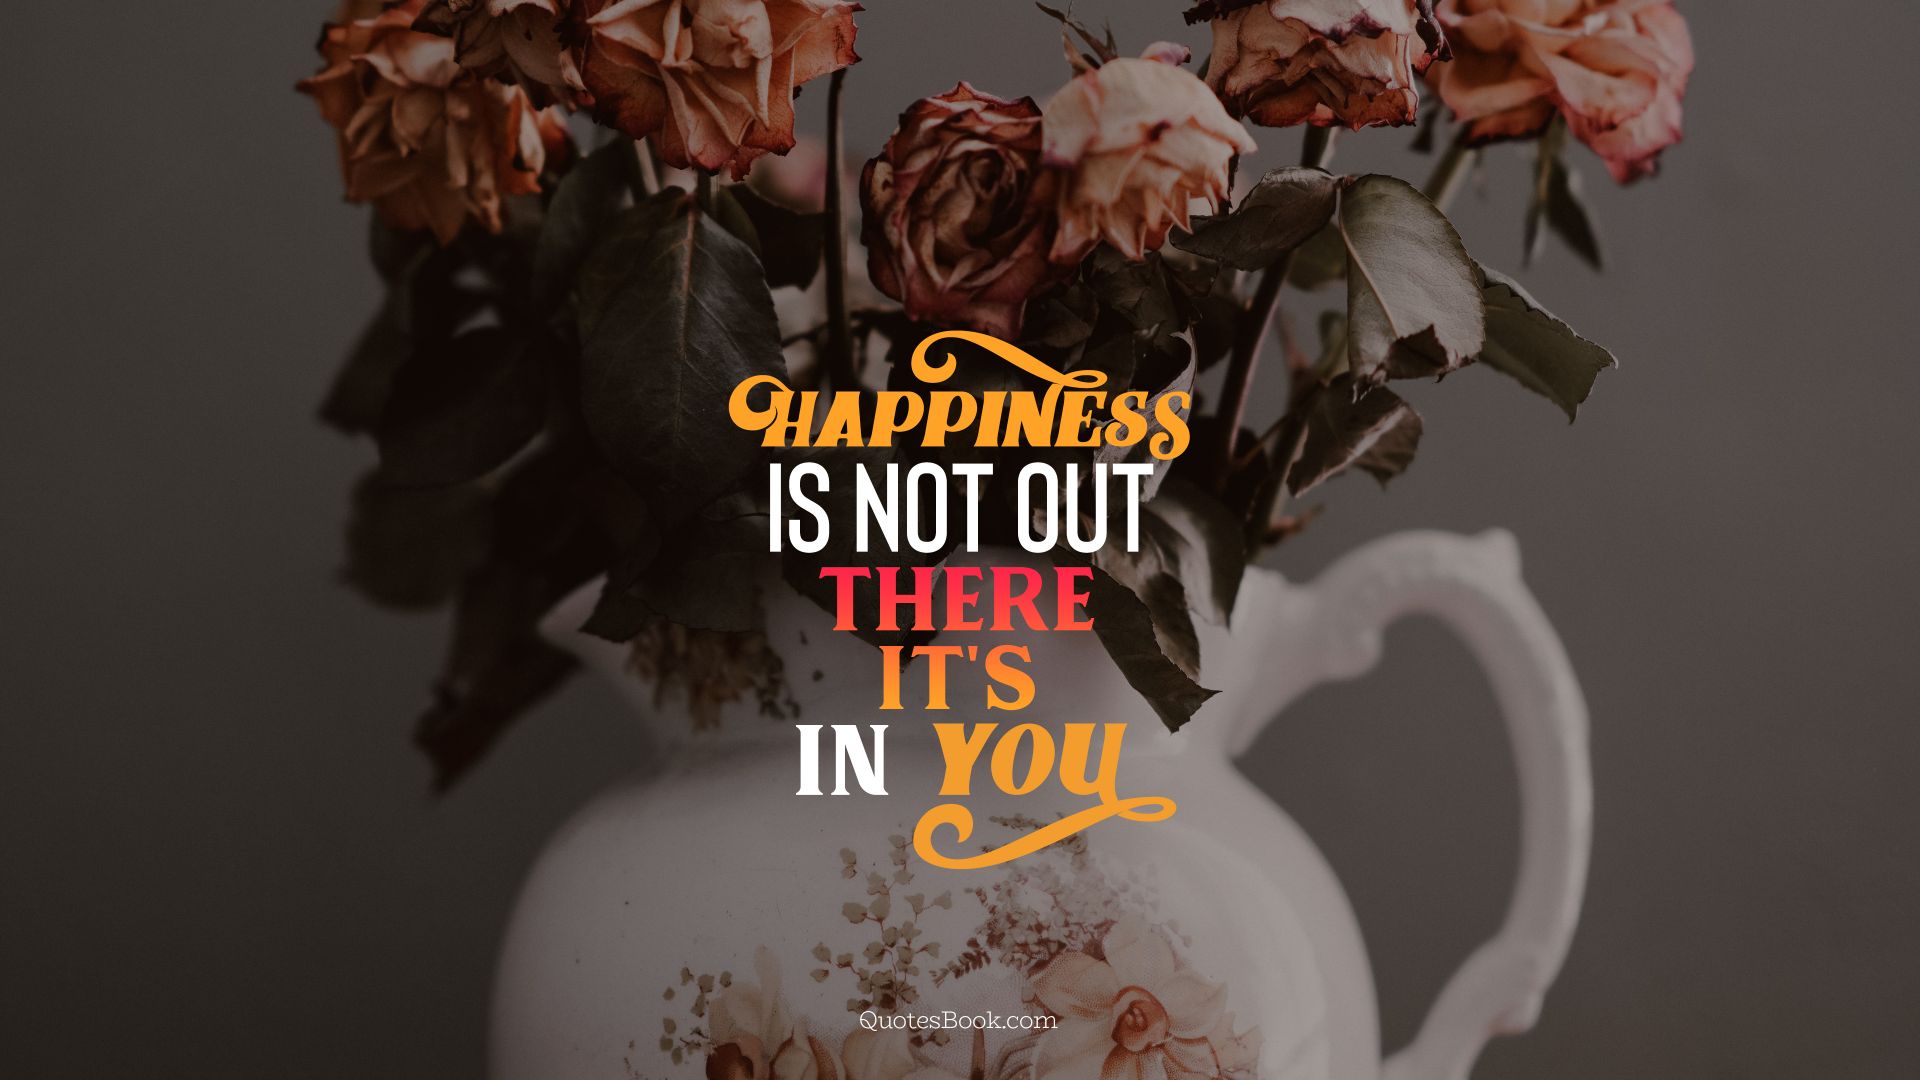 Happiness is not out there it's in you